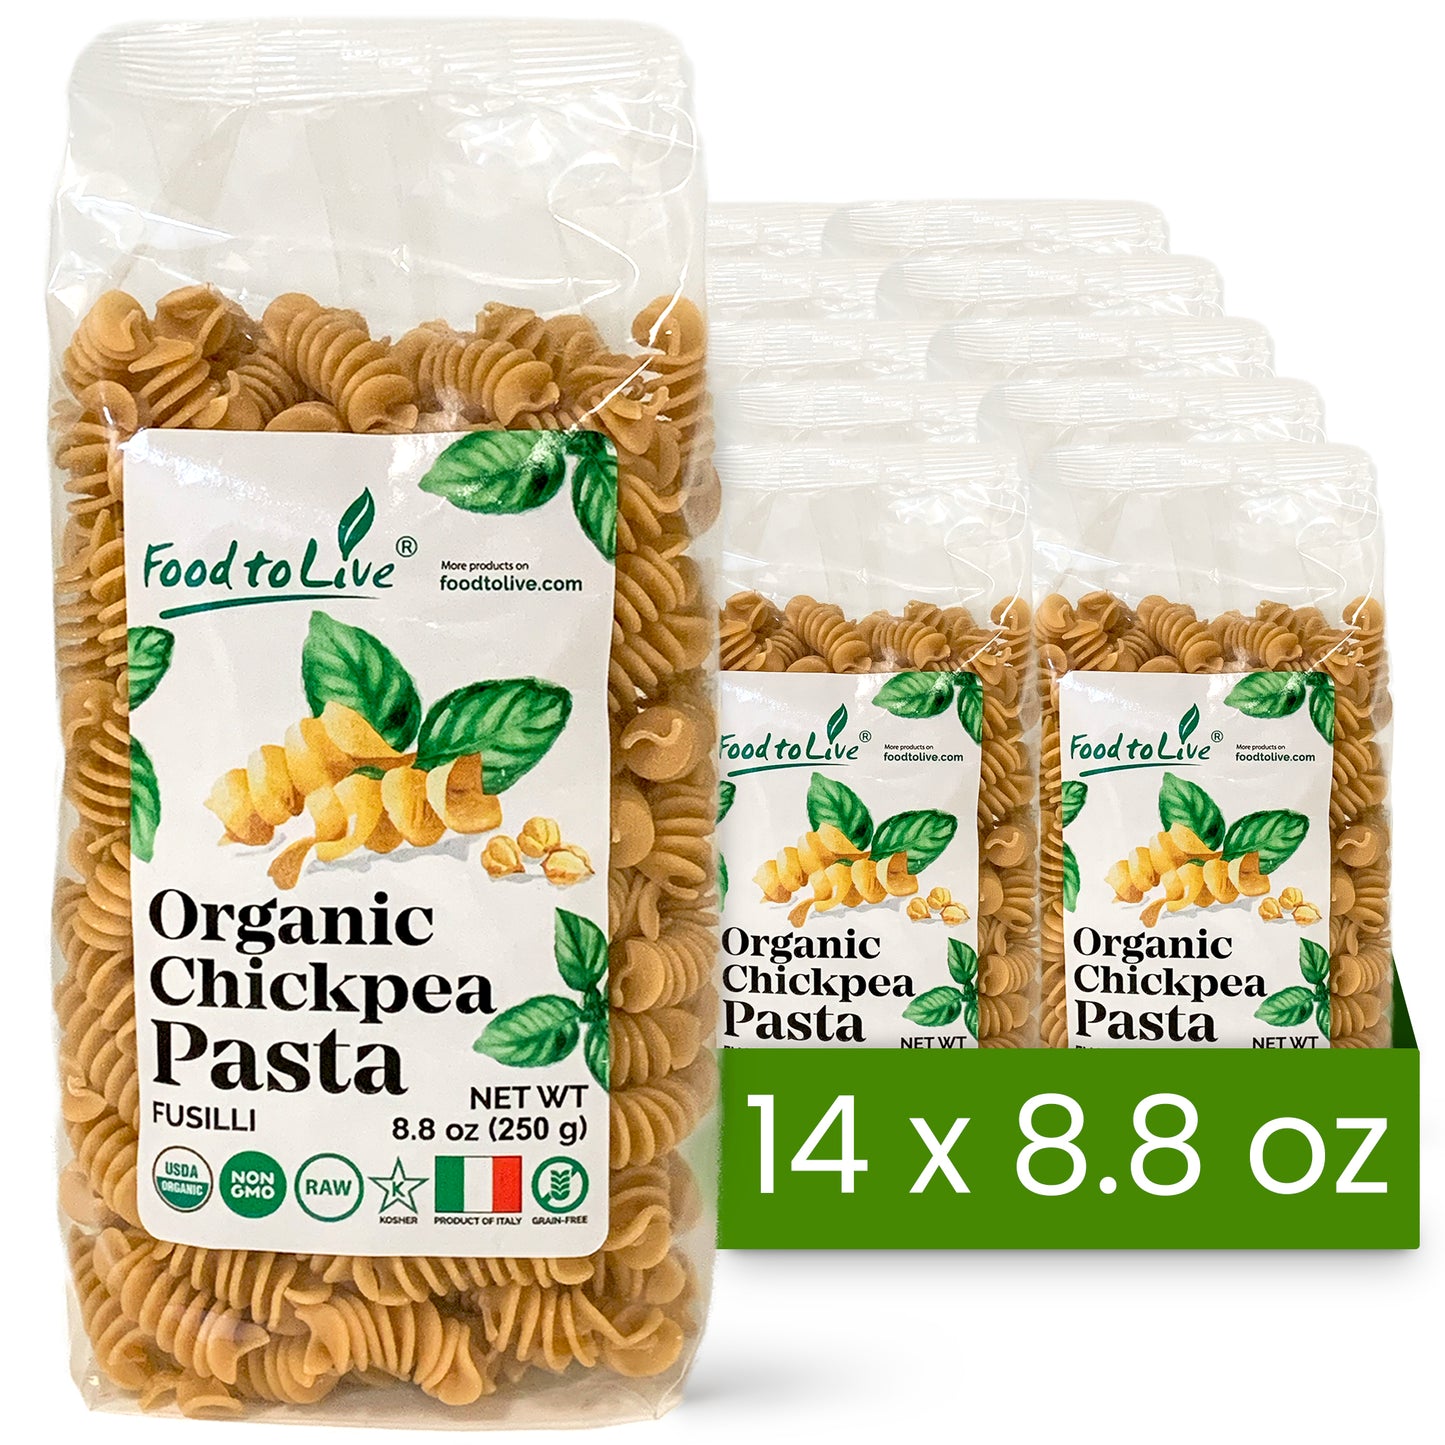 Organic Chickpea Fusilli Pasta, 8.8 oz – Non-GMO, Single Ingredient. No Additives. No Major Allergens. Good Source of Plant Based Protein and Fiber. Kosher. Vegan. Low Glycemic Index. Made in Italy